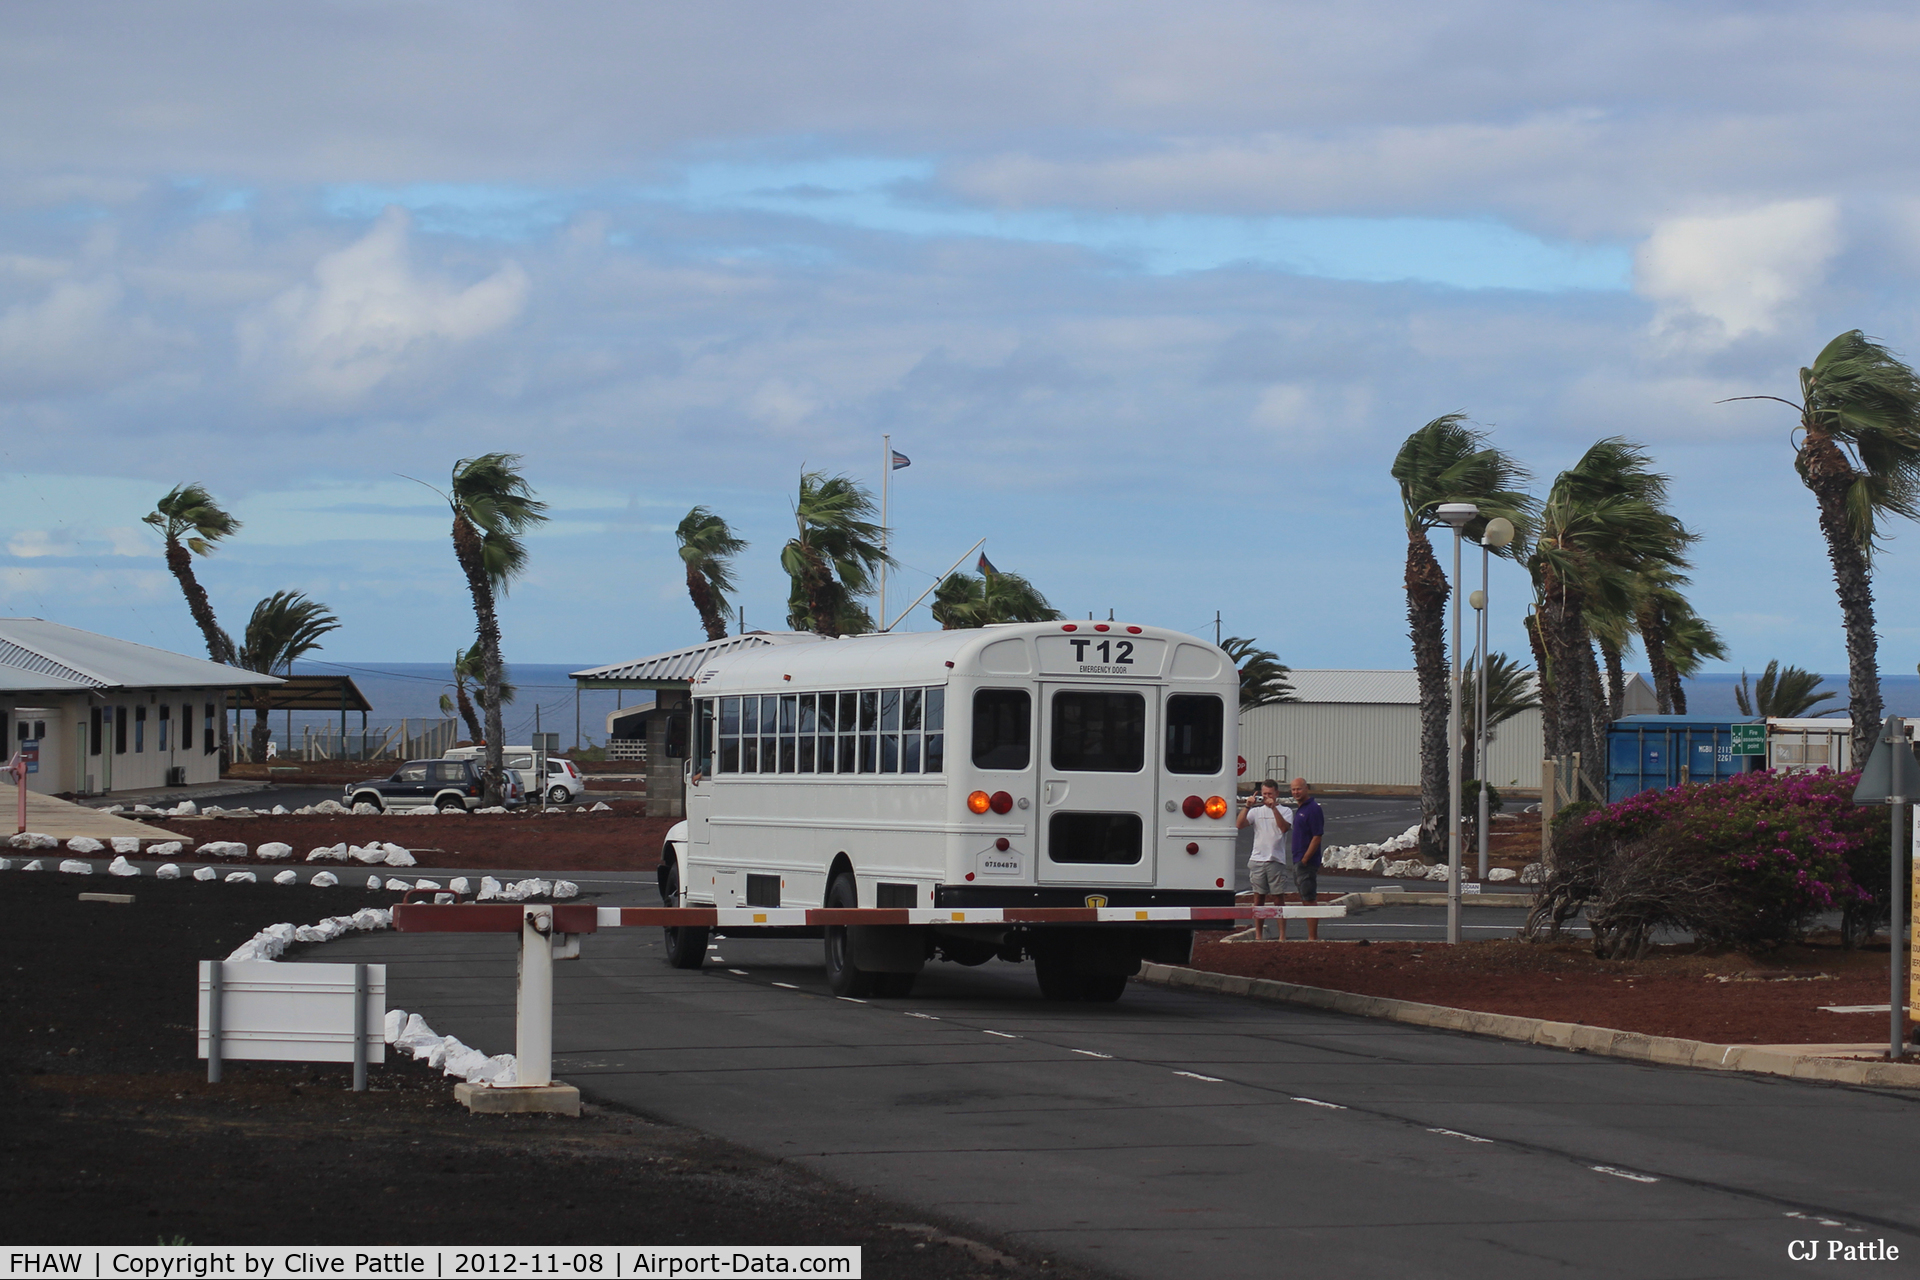 FHAW Airport - Some of the airport buildings at Ascension Island FHAW